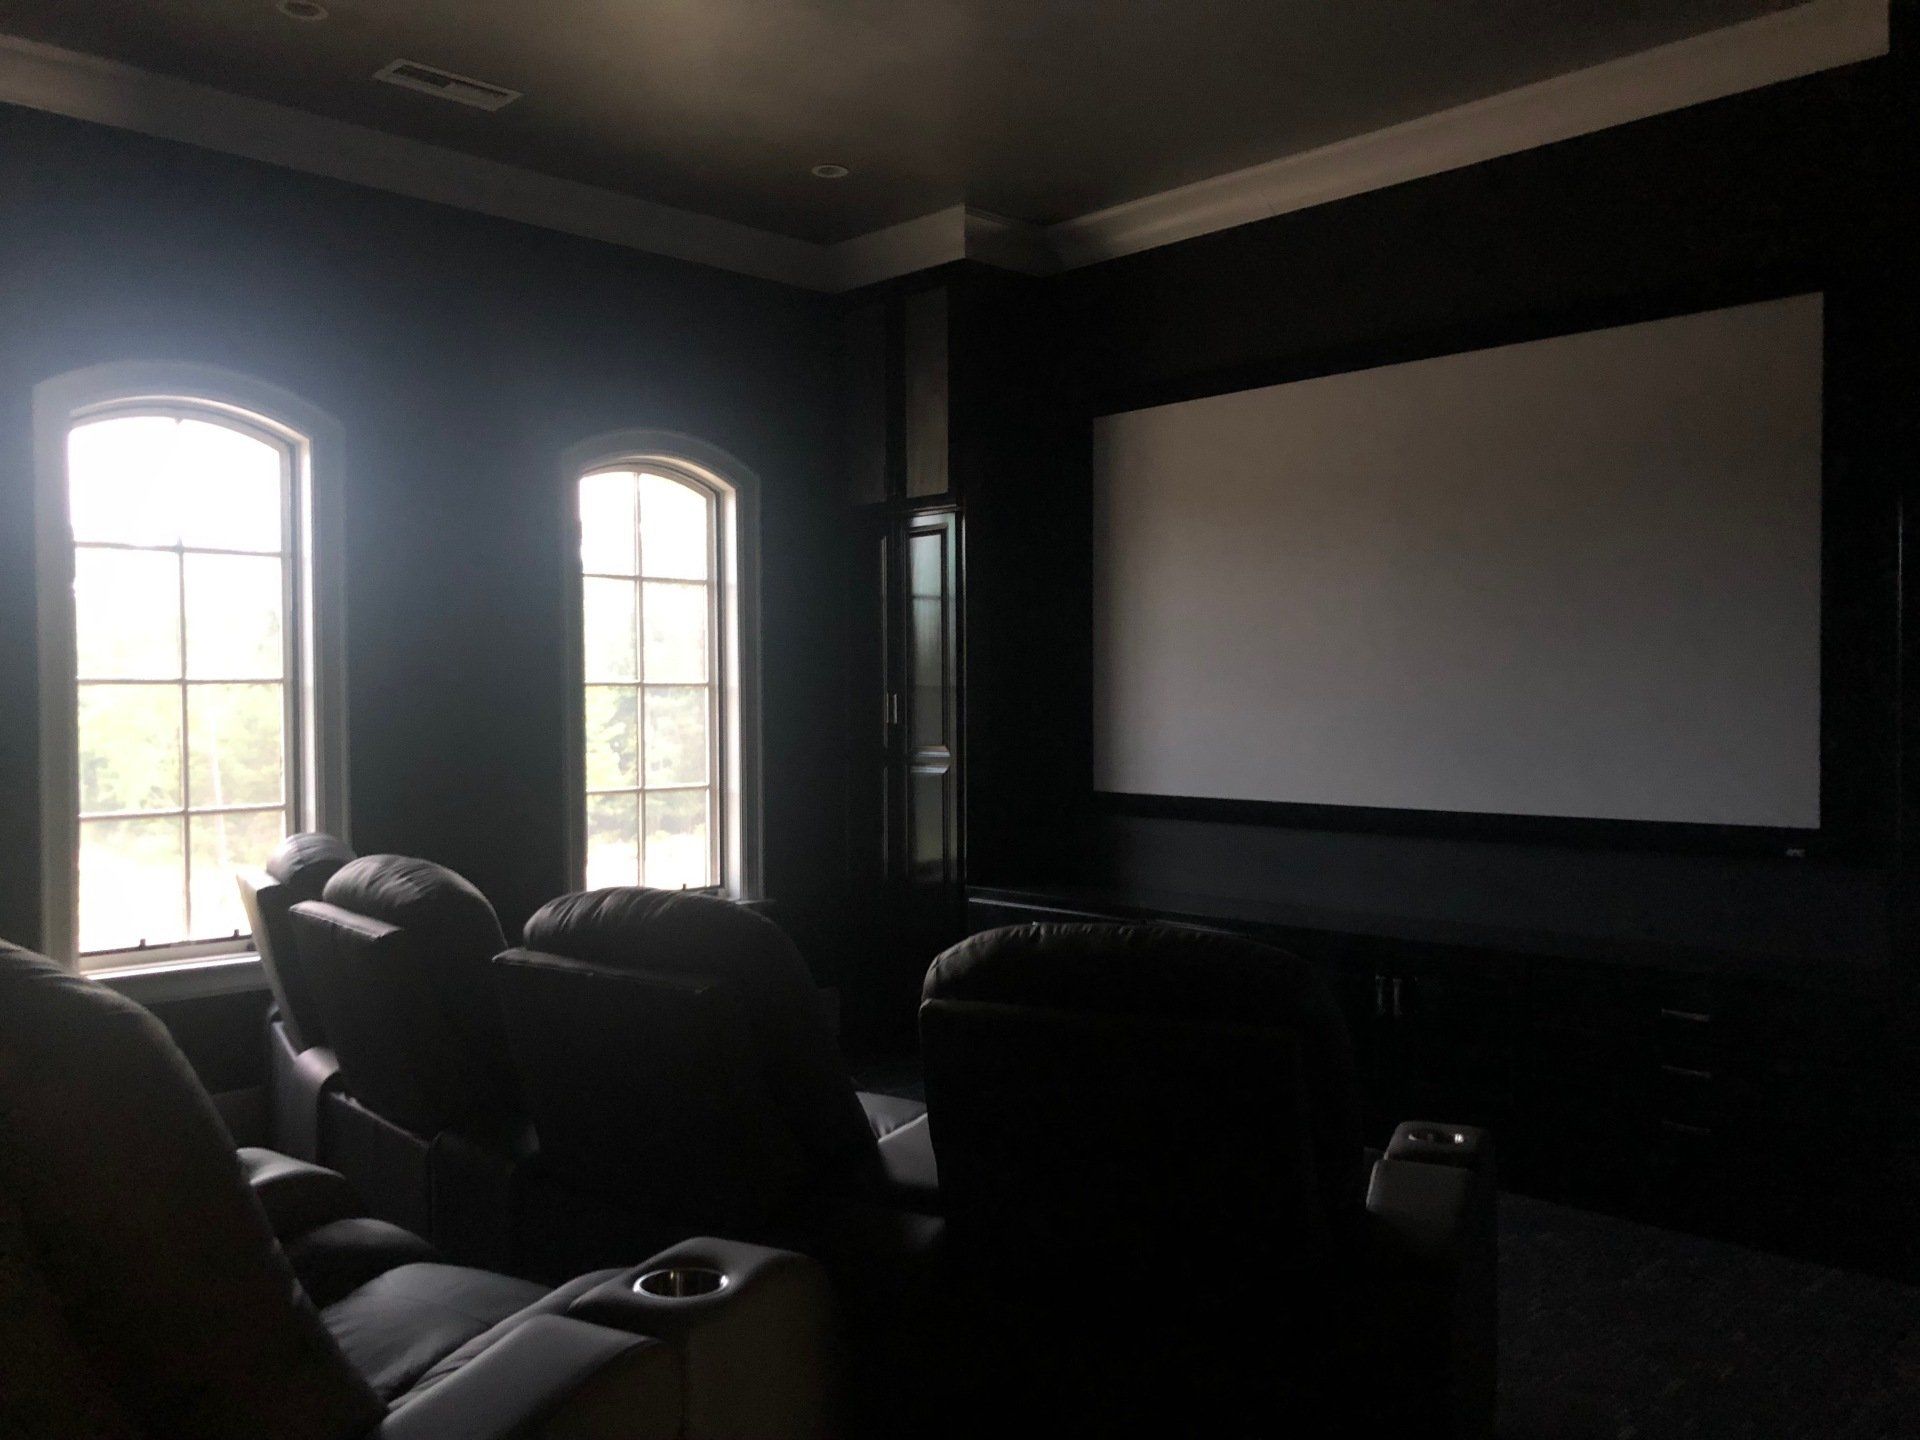 Home window tinting in Birmingham AL - SPF home window tinting service created the perfect setting in this home theatre in Birmingham, AL